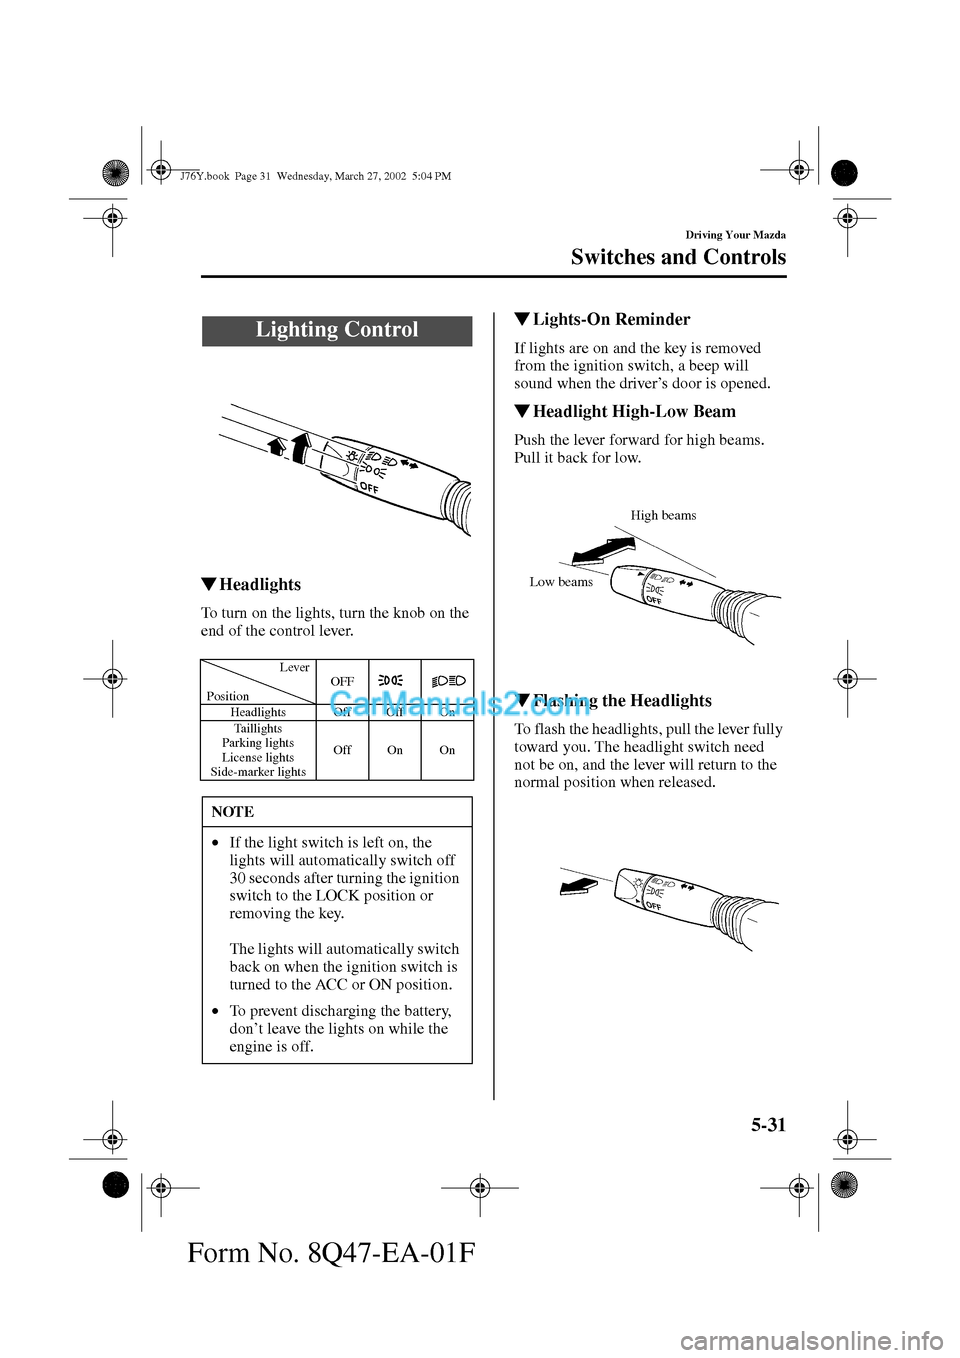 MAZDA MODEL MILLENIA 2002  Owners Manual (in English) 5-31
Driving Your Mazda
Form No. 8Q47-EA-01F
Switches and Controls
Headlights
To turn on the lights, turn the knob on the 
end of the control lever.
Lights-On Reminder
If lights are on and the key i